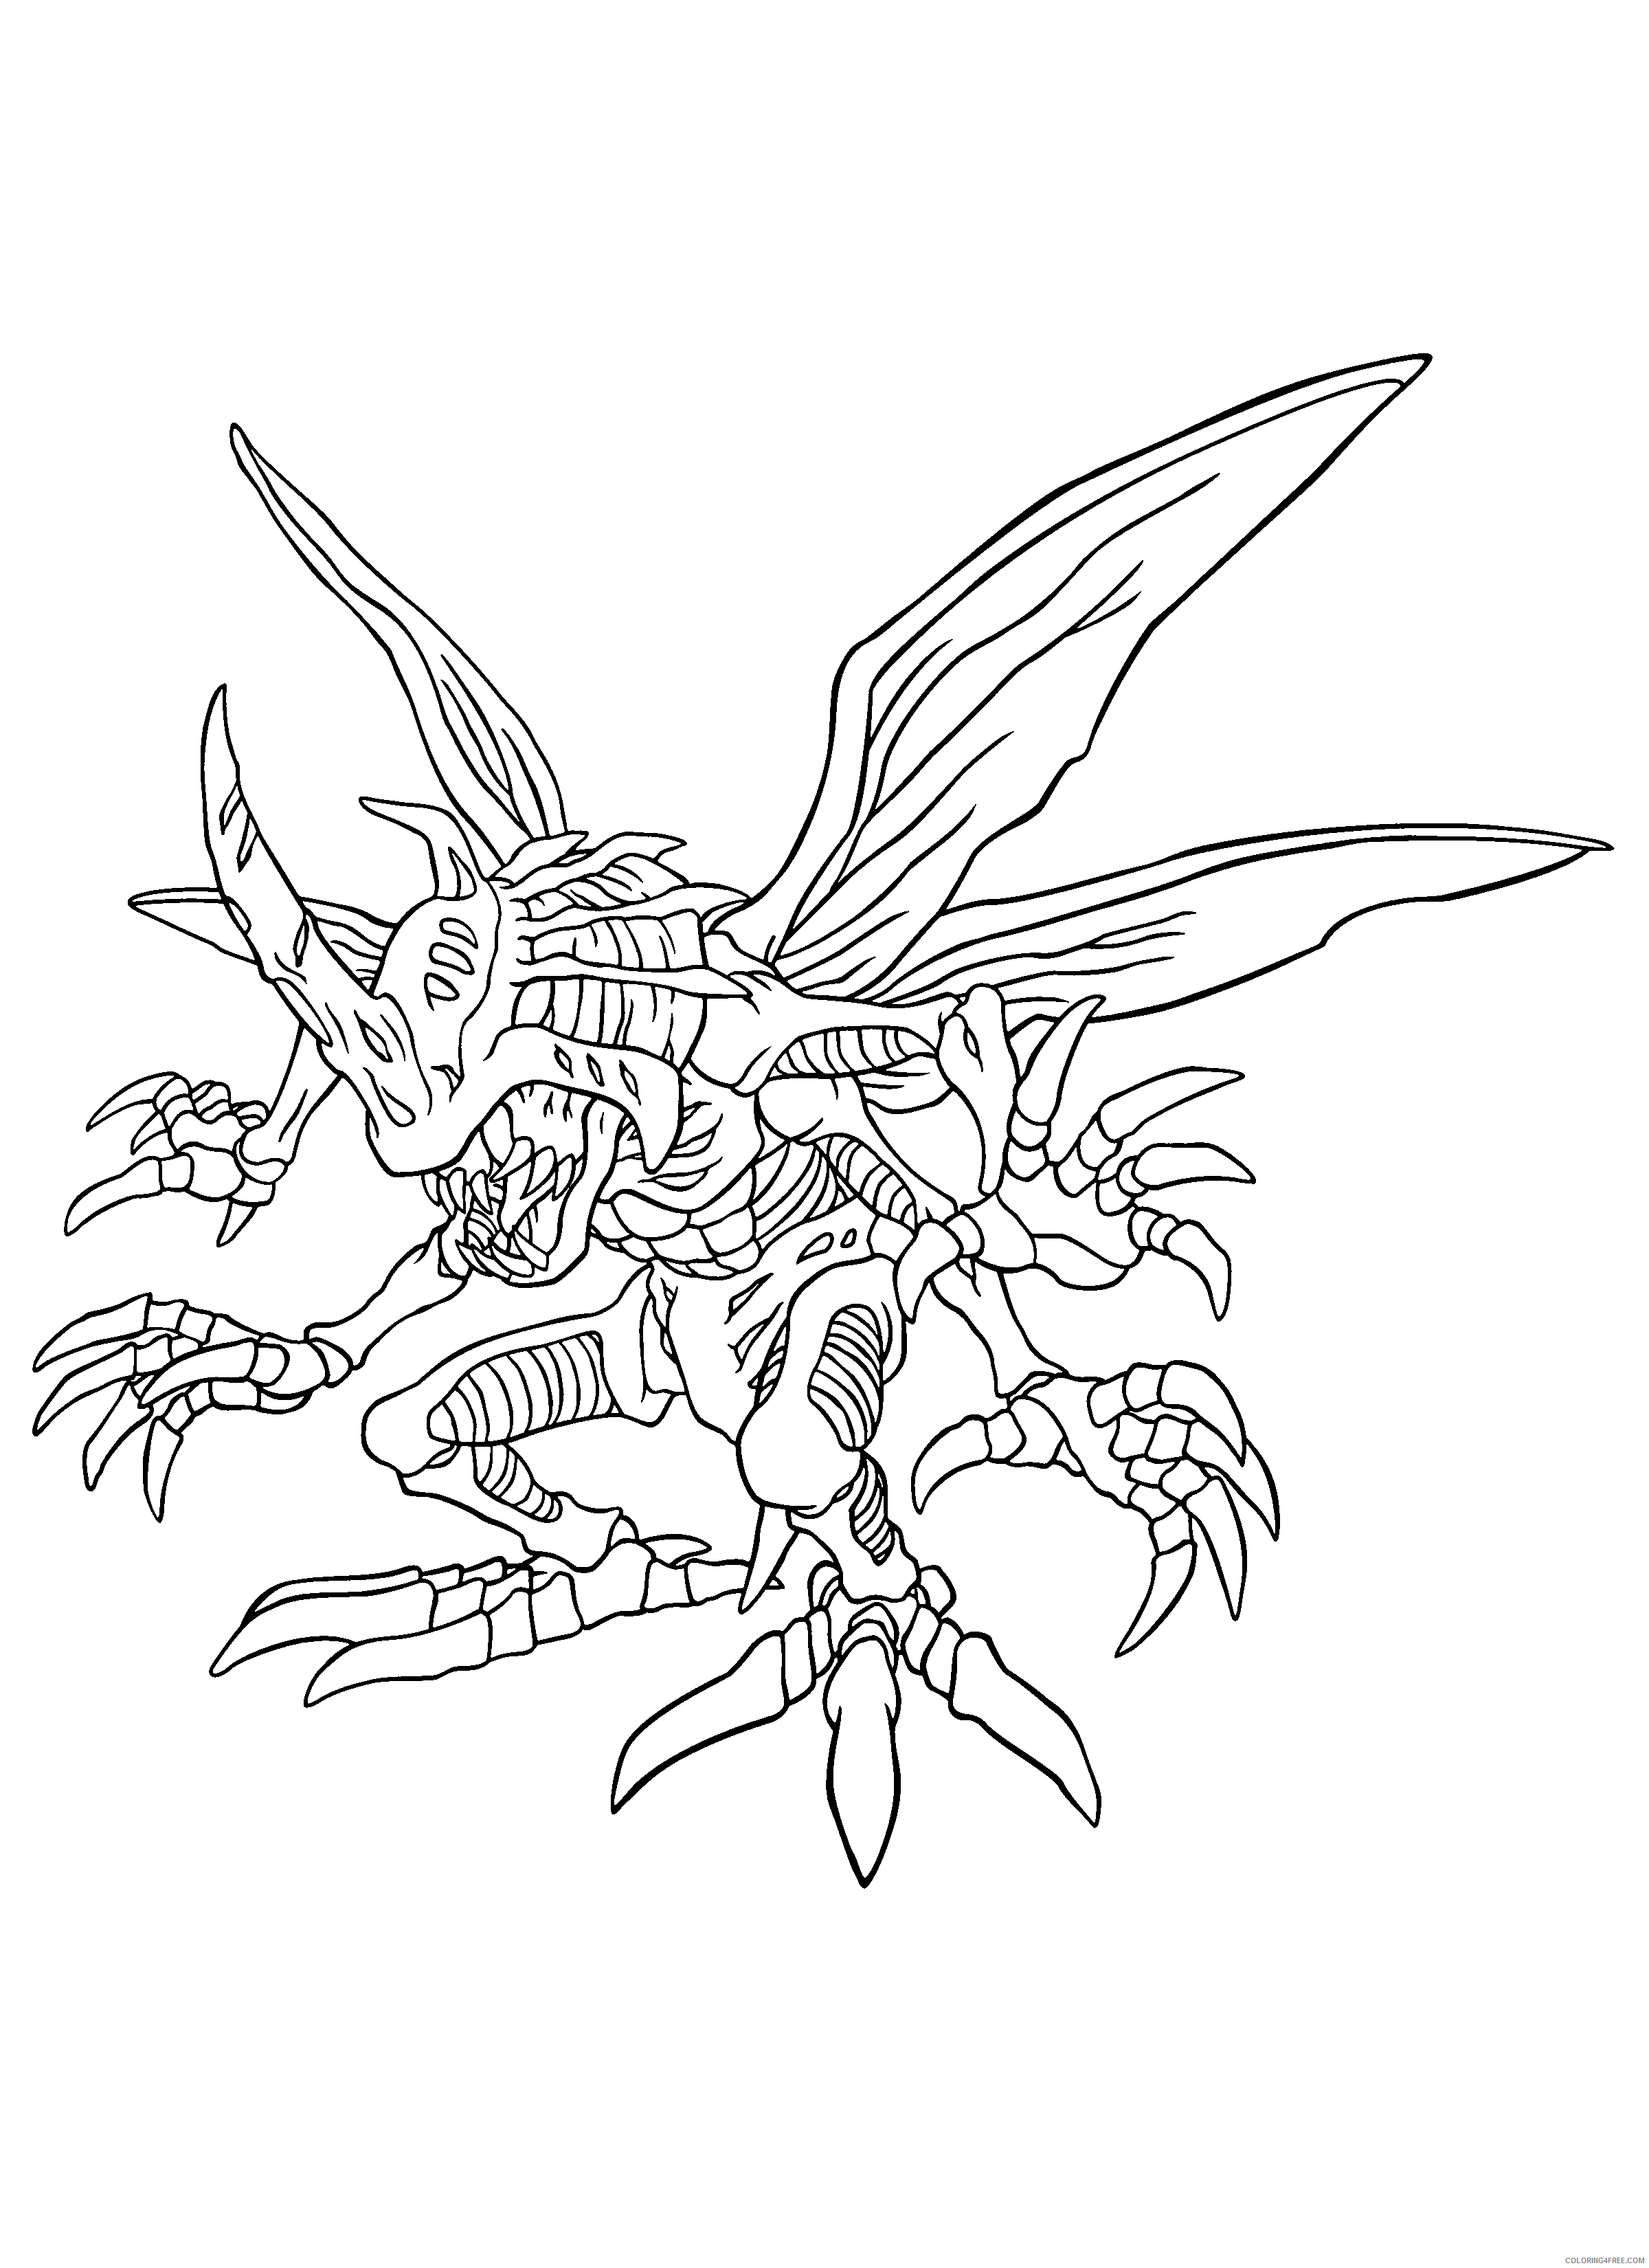 Digimon Printable Coloring Pages Anime digimon 259 2021 0339 Coloring4free